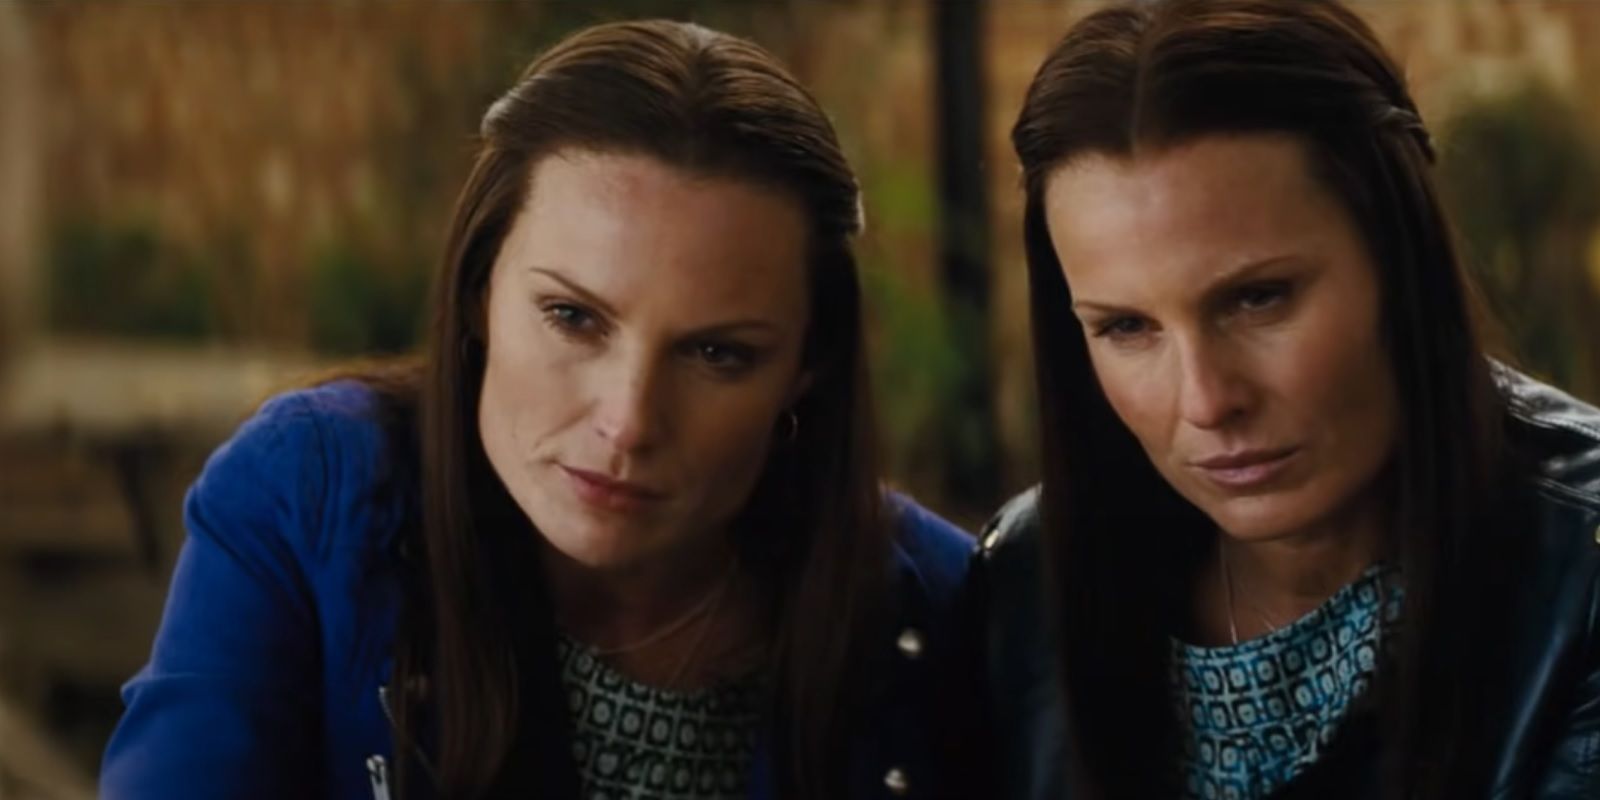 The creepy robot twins in The World's End